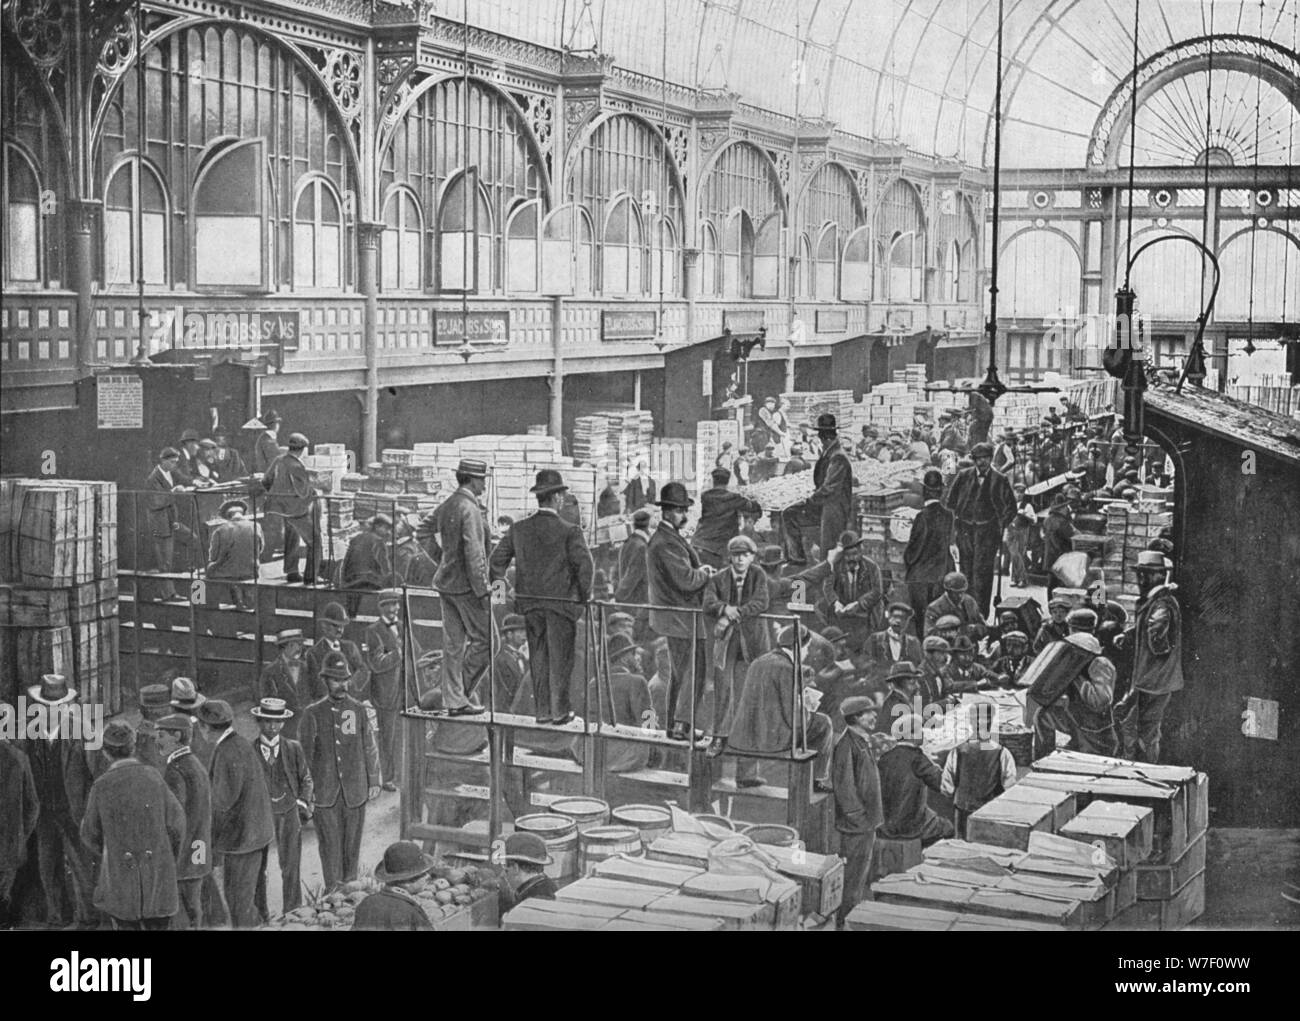 Interior of covent garden market Black and White Stock Photos & Images ...